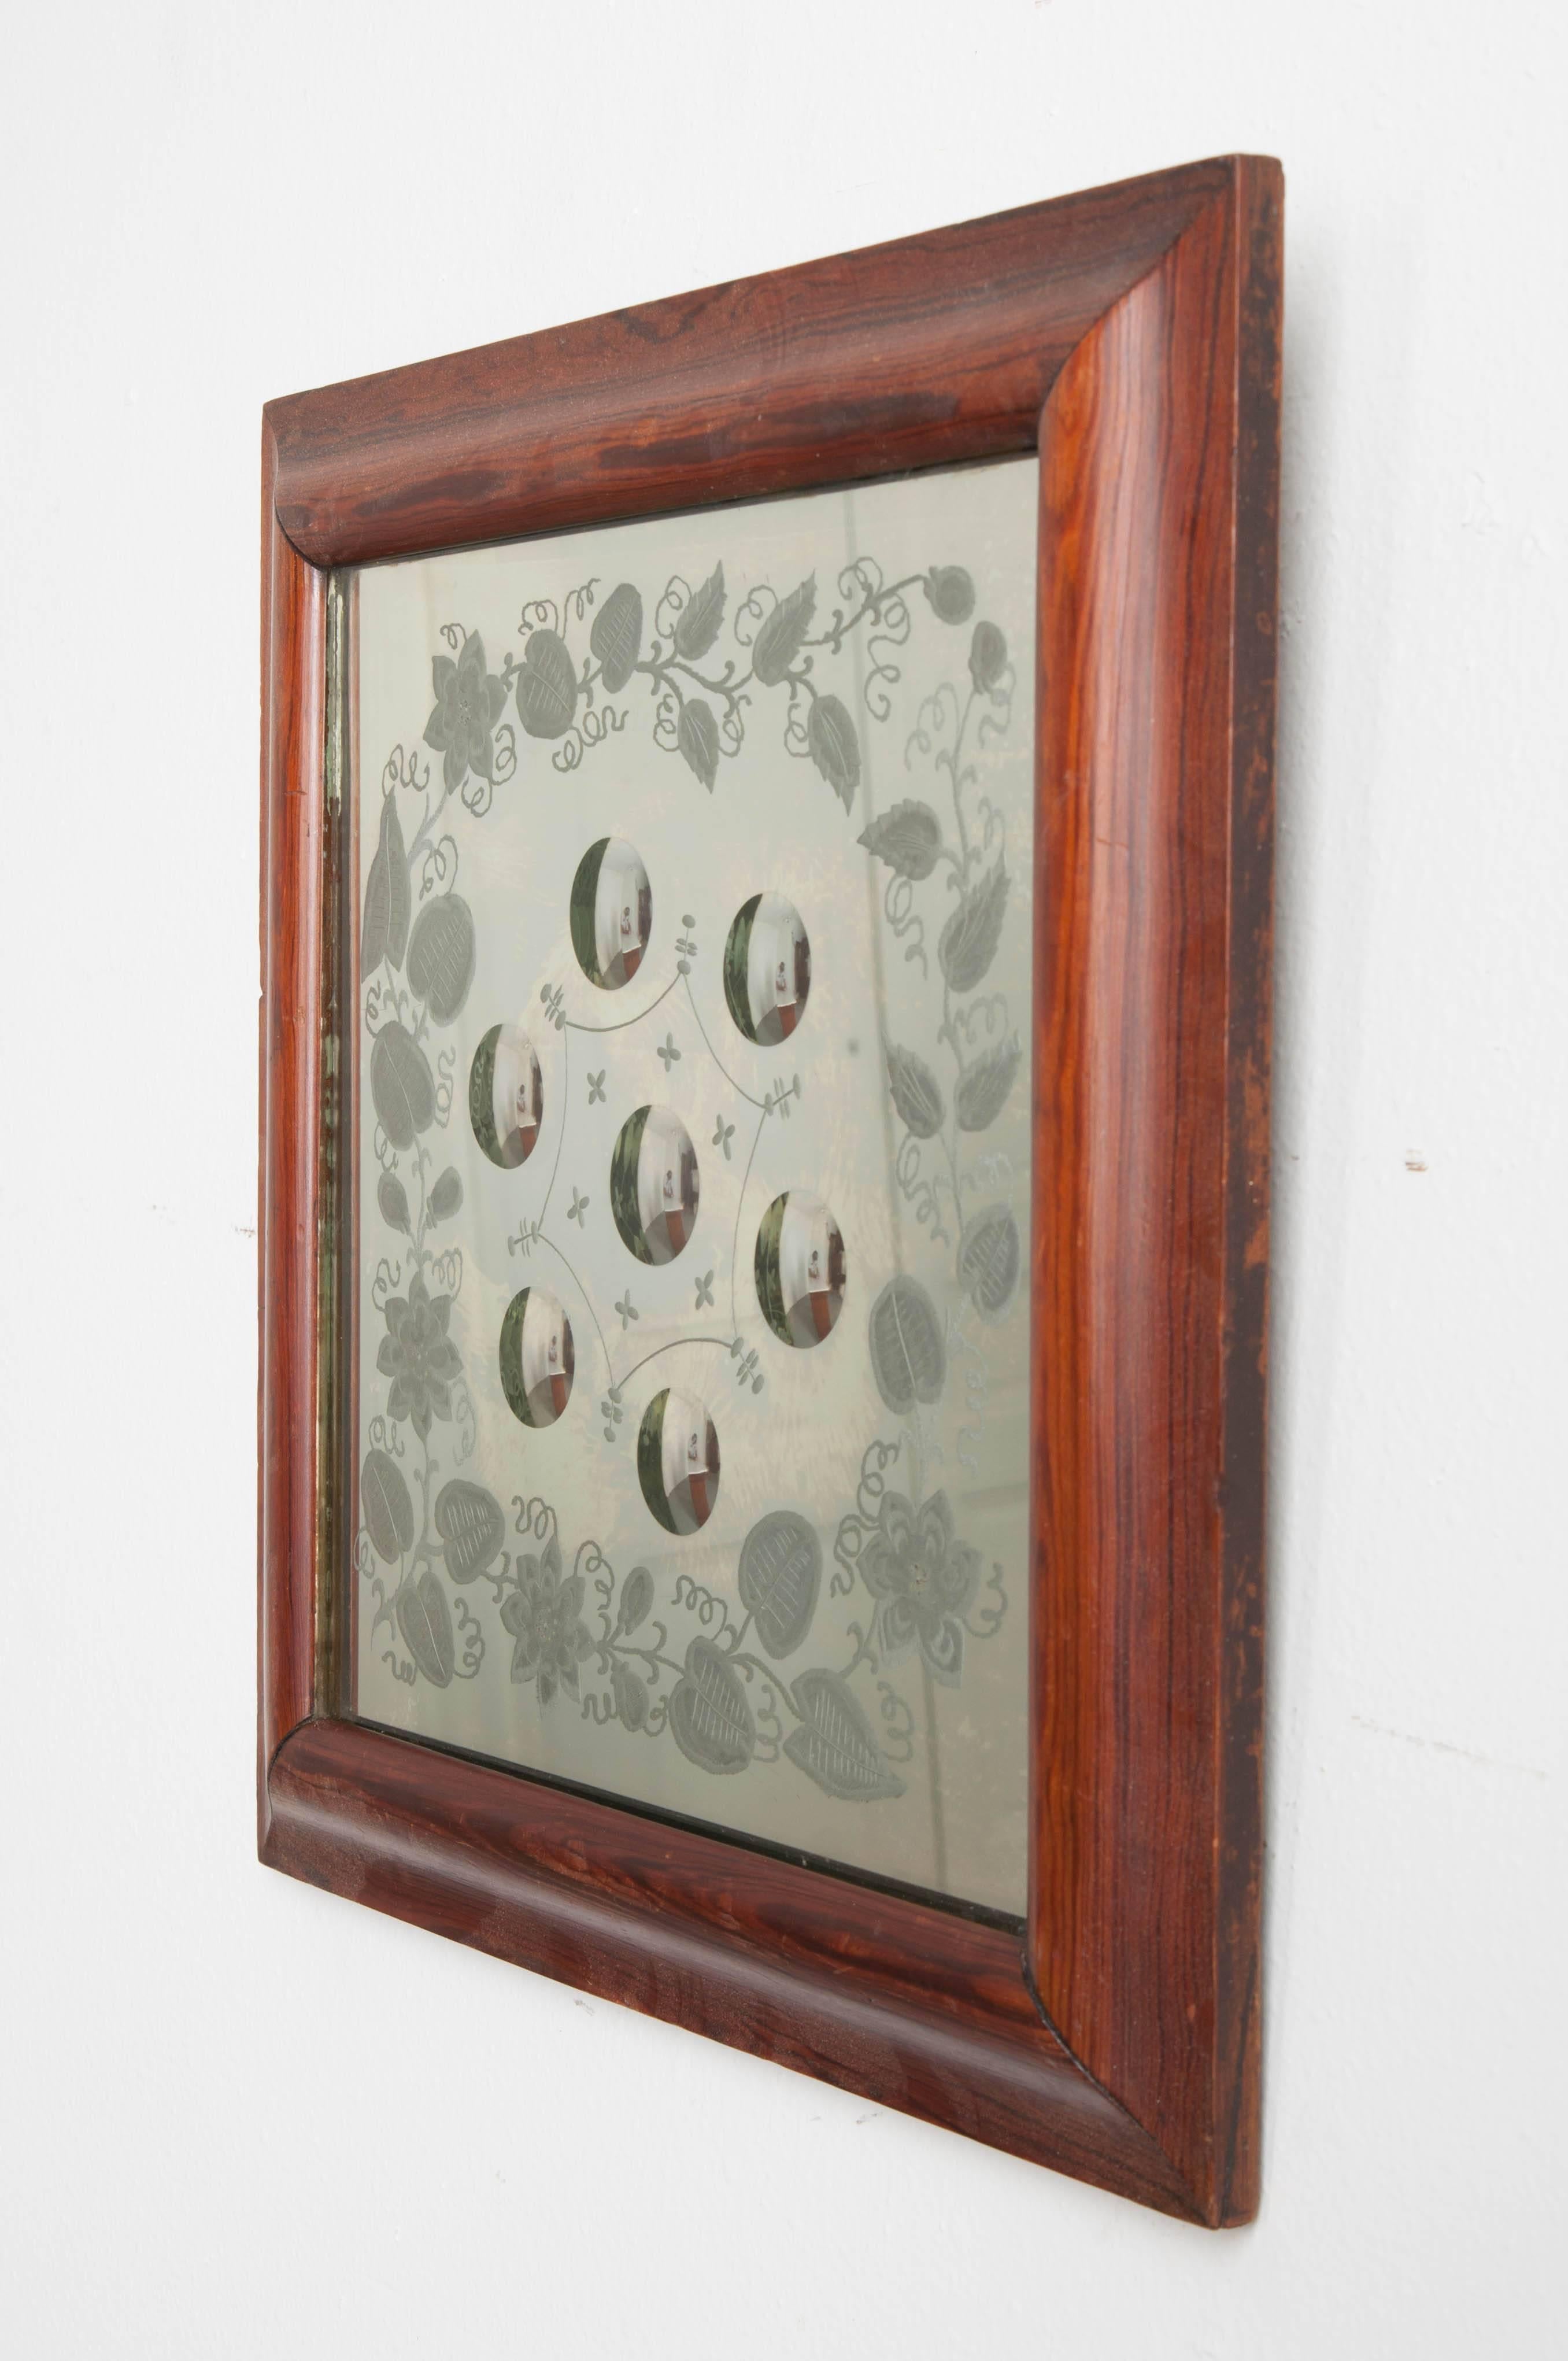 Victorian English, 19th Century, Square Framed Bullseye Mirror For Sale